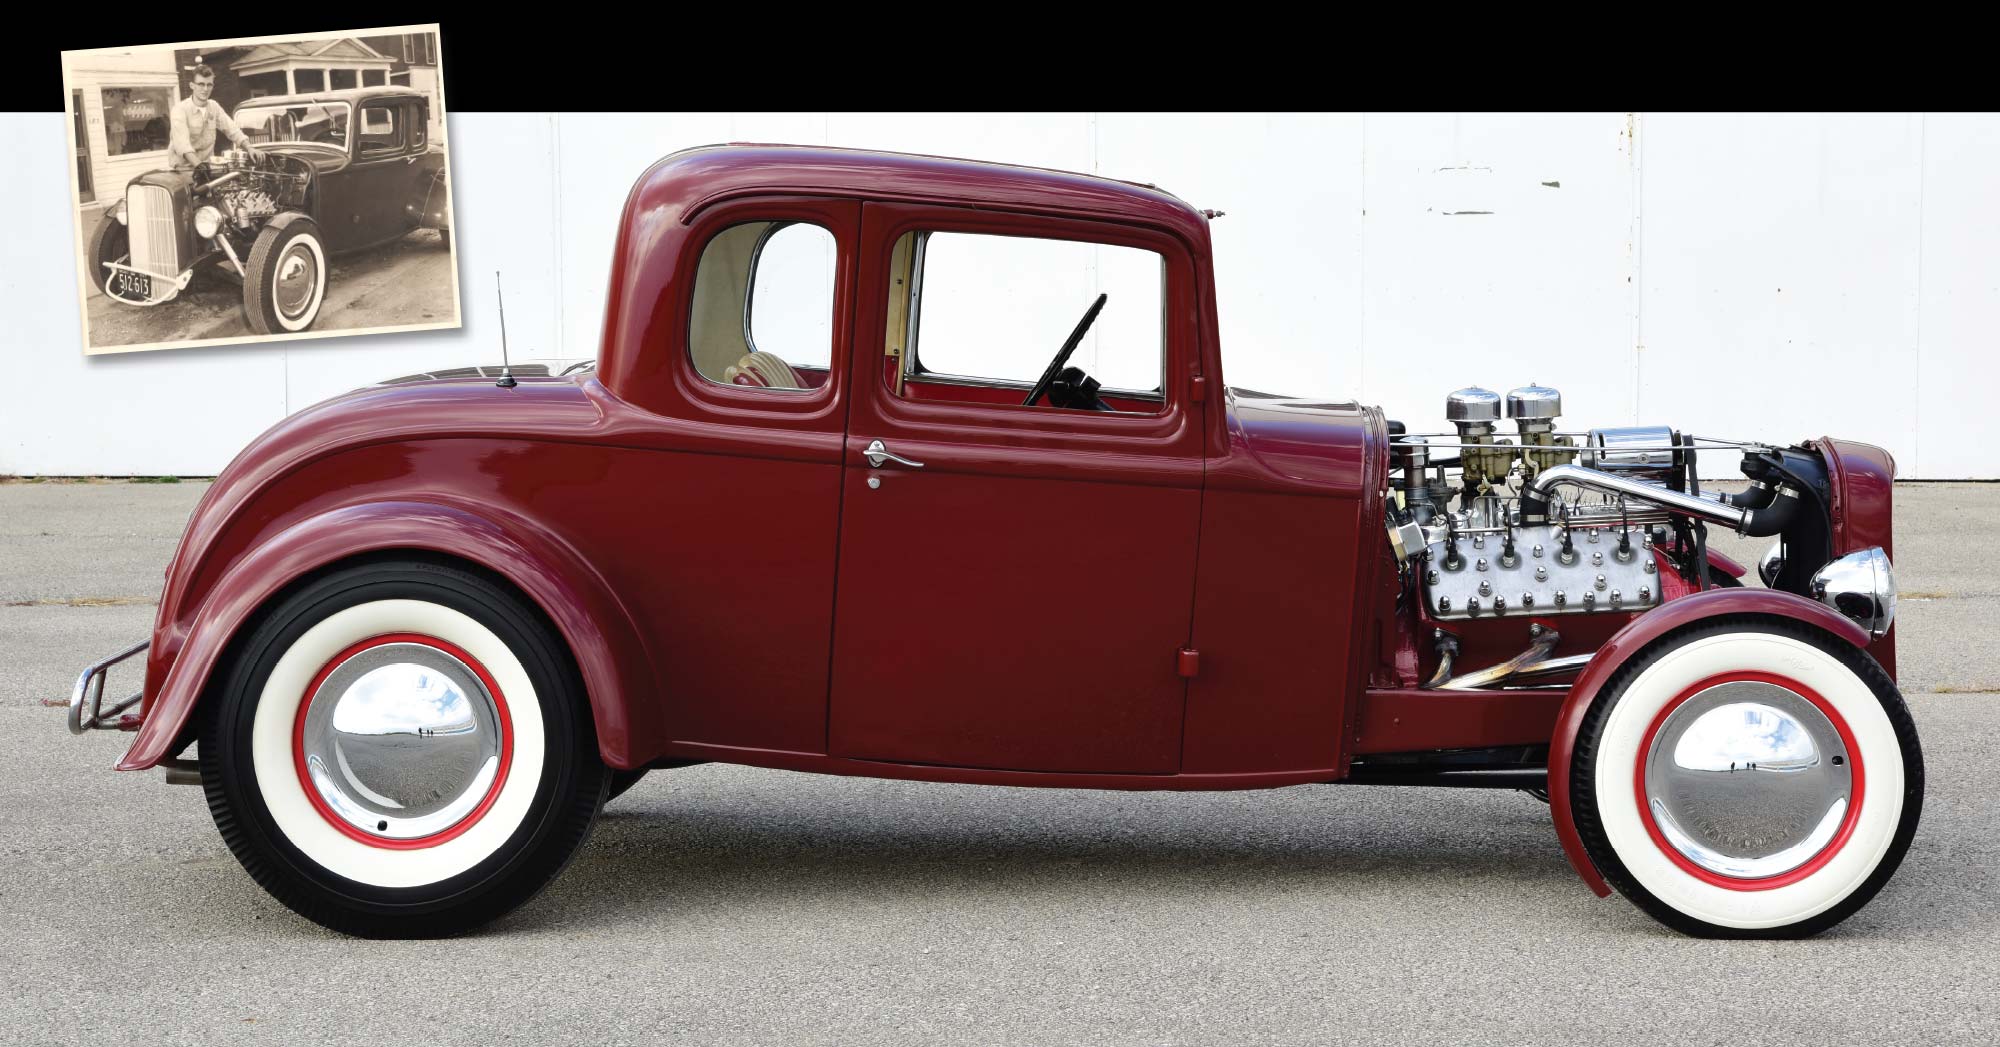 Rob and Marilyn Morrison’s Traditional 1932 Ford Coupe Before and After